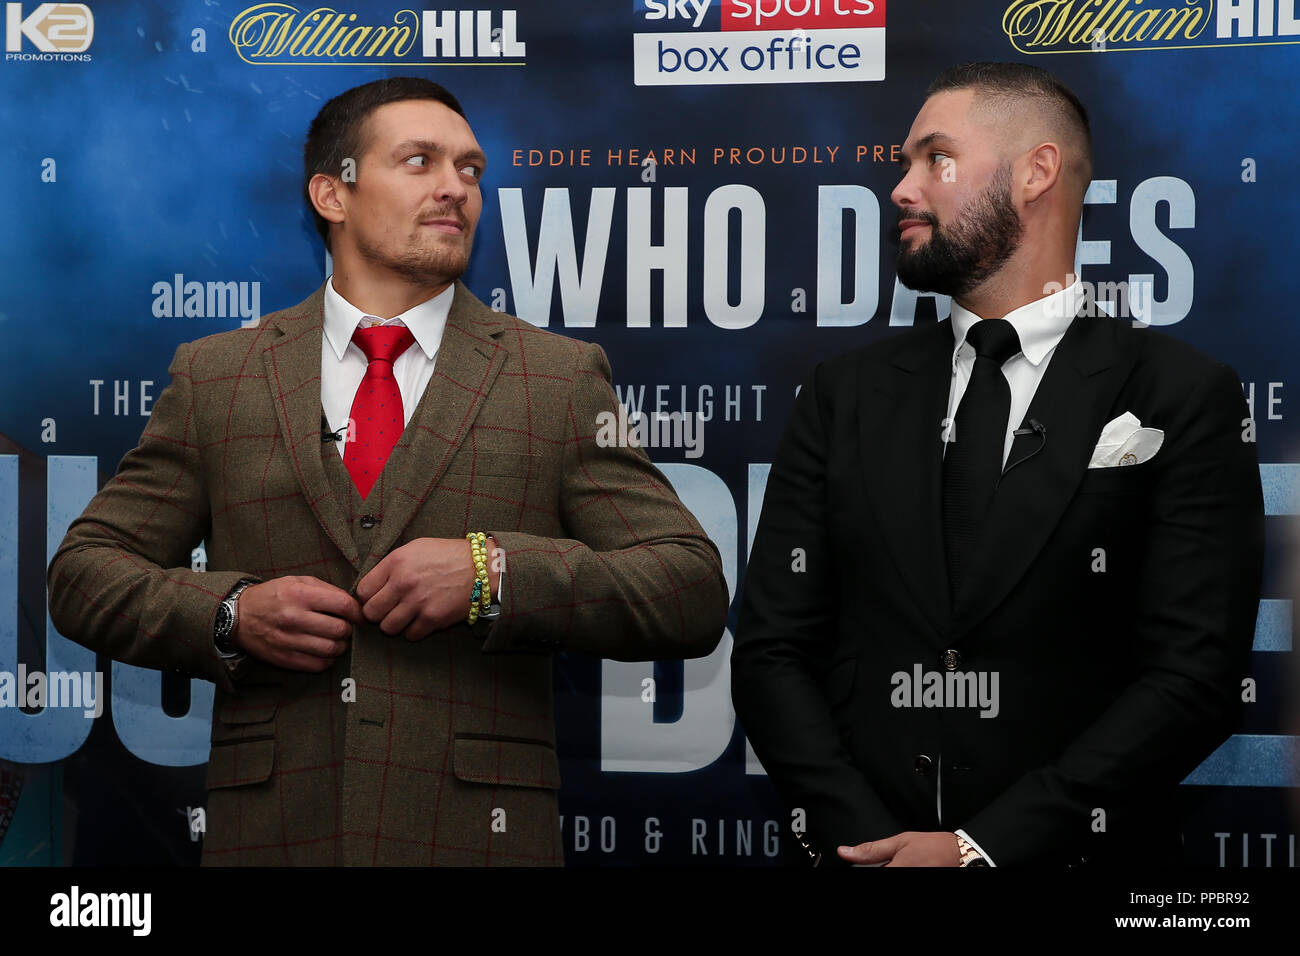 Manchester, UK. Monday 24th September 2018. Oleksandr Usyk and Tony Bellew face off during a Matchroom Boxing press conference in Manchester, UK. Credit: UK Sports Agency/Alamy Live News Stock Photo